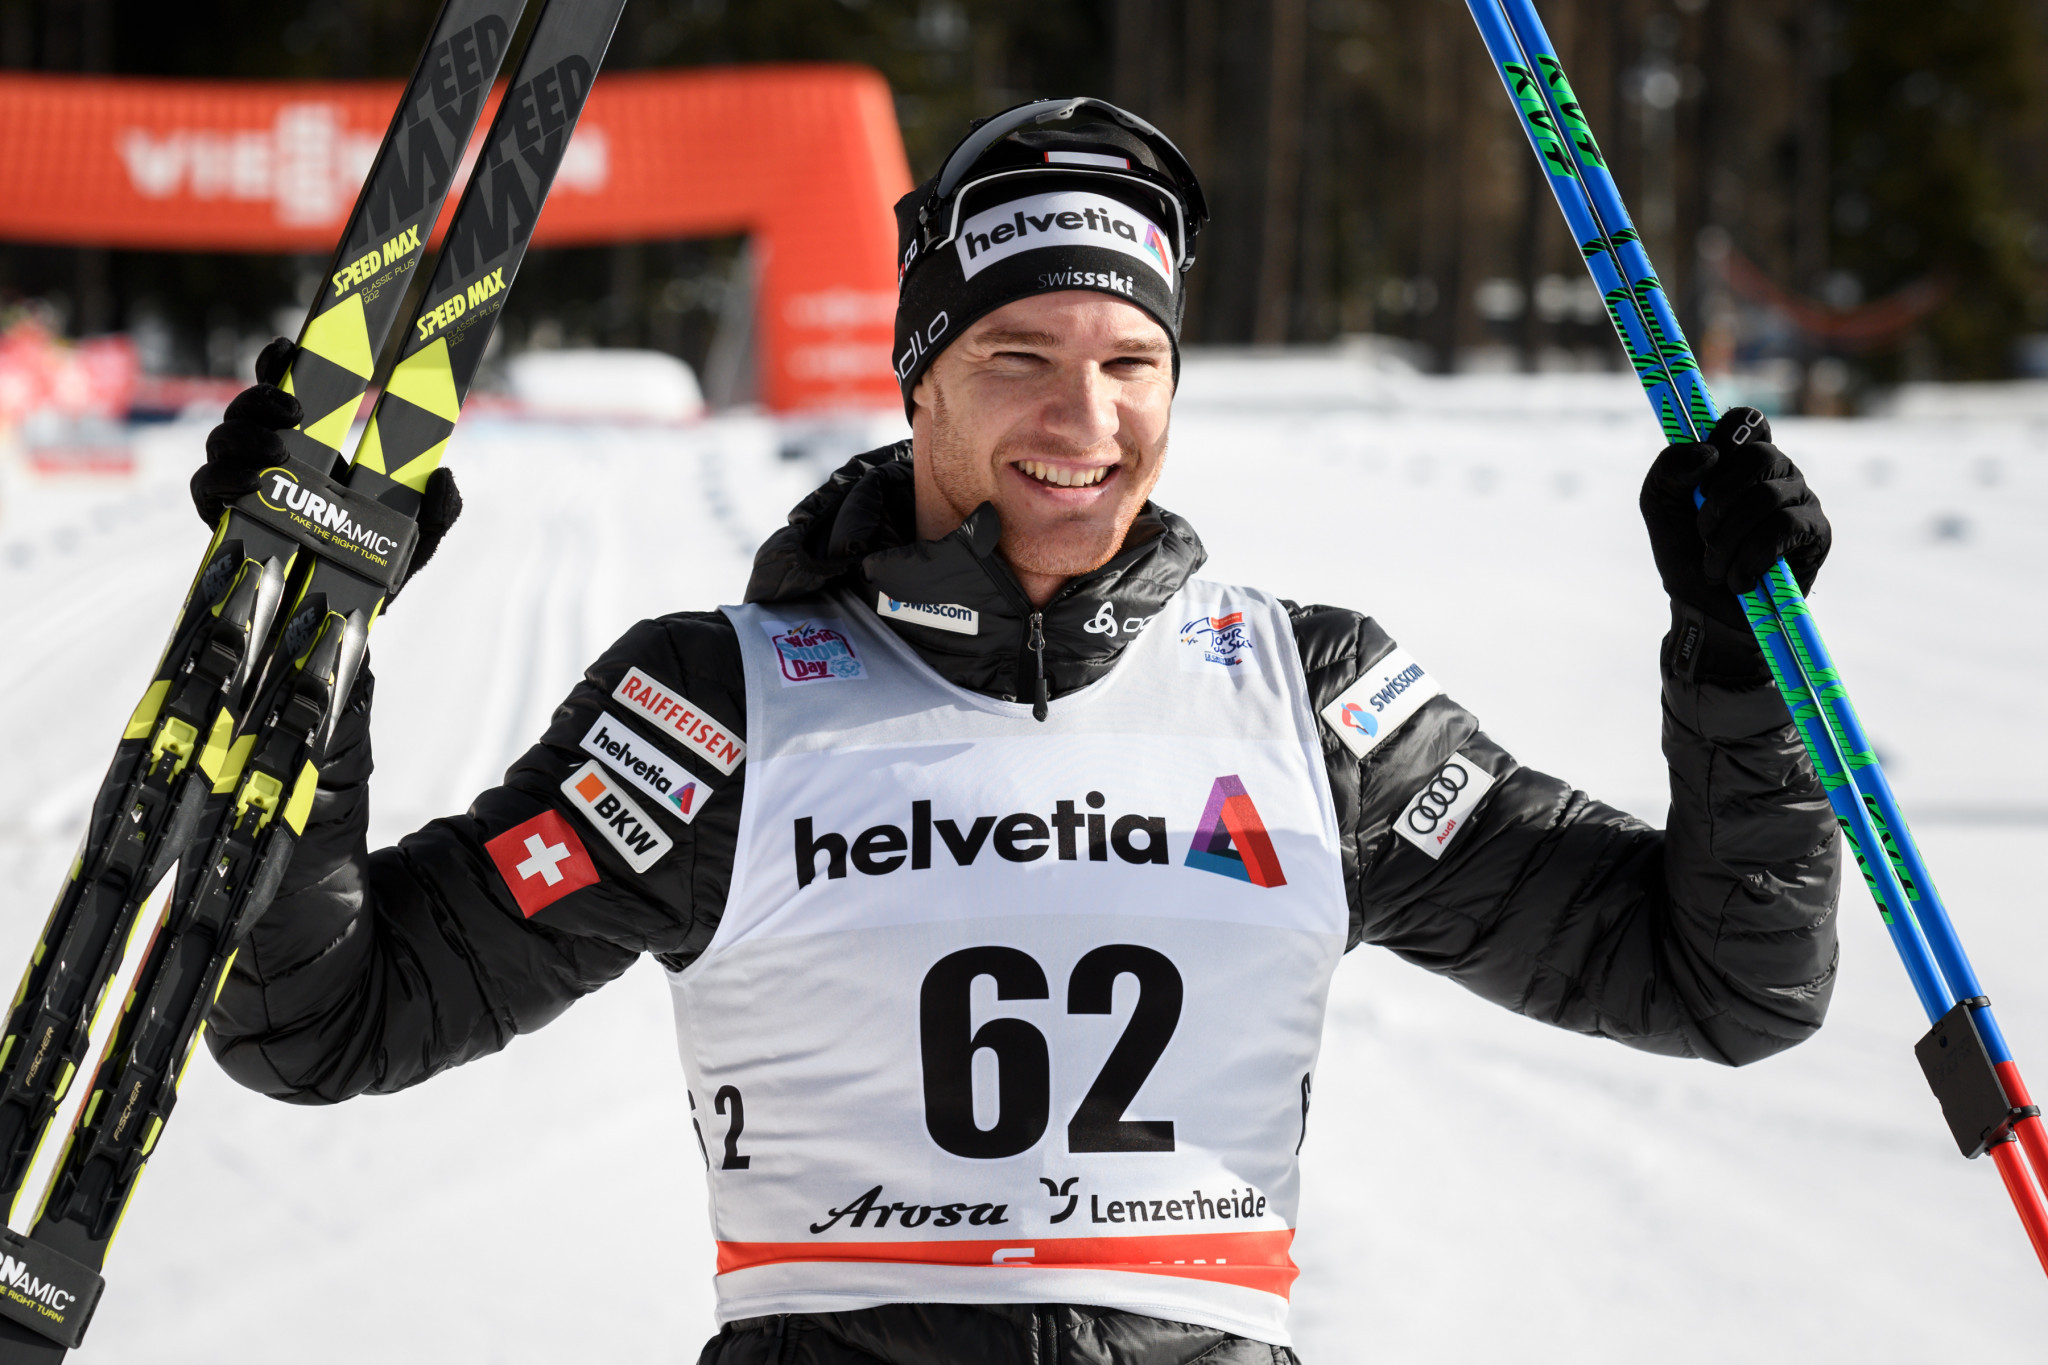 Cologna takes FIS Cross-Country World Cup gold on home snow in Lenzerheide